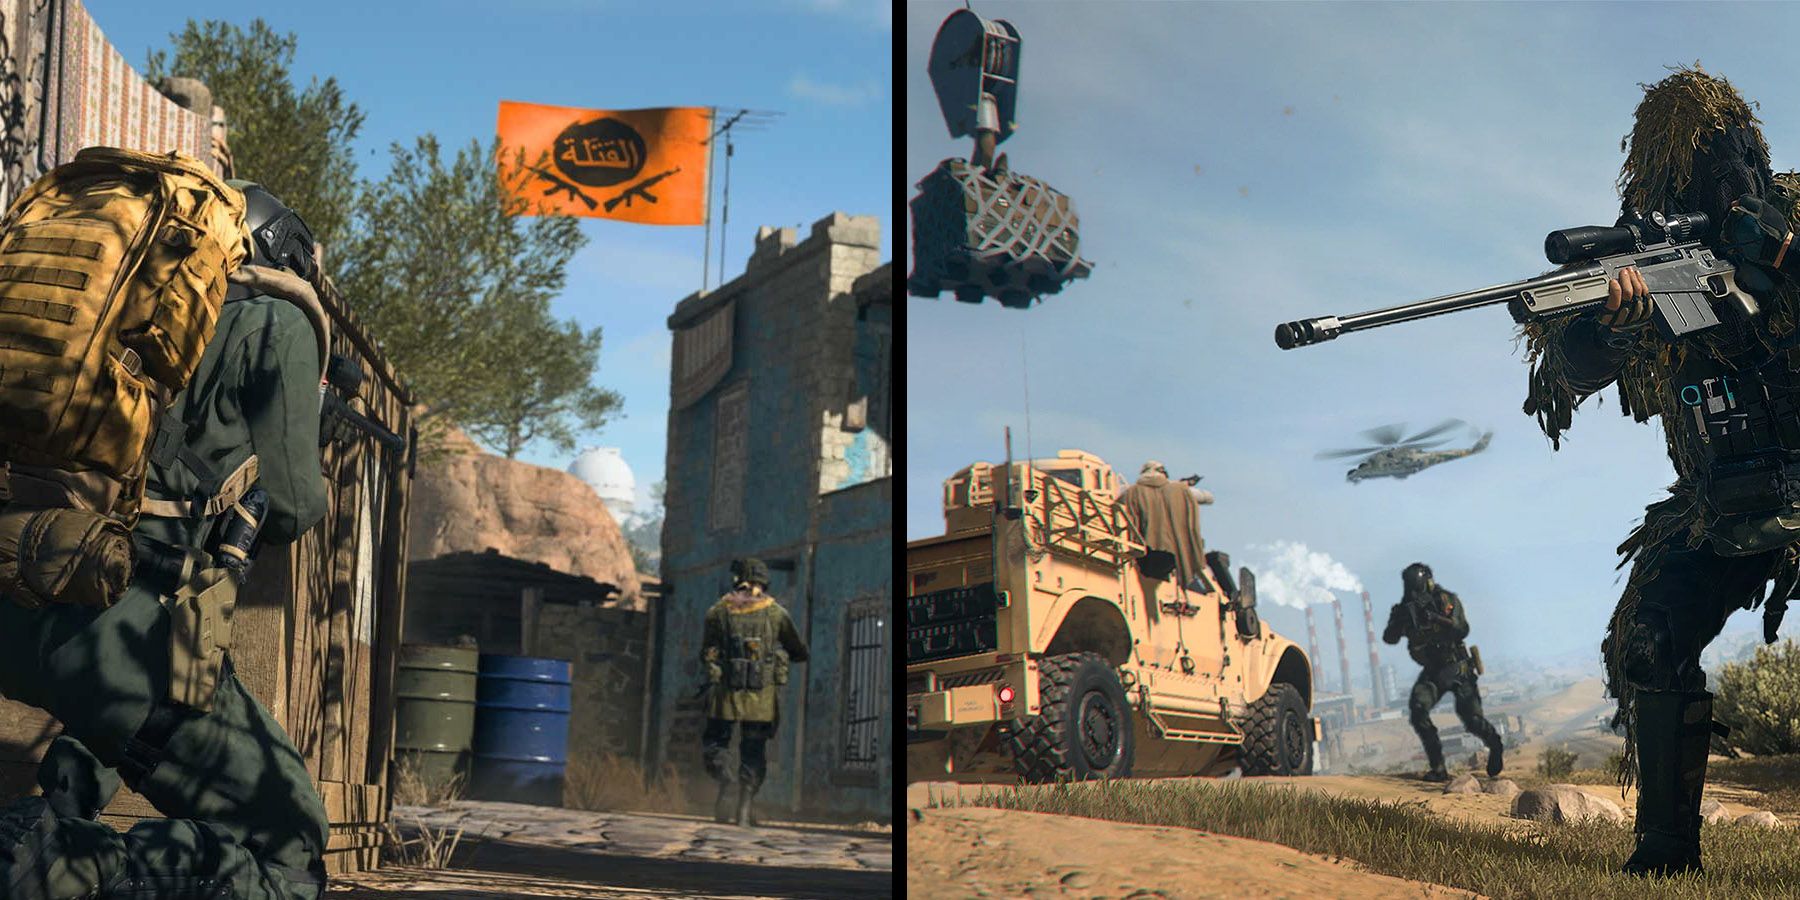 Call Of Duty Modern Warfare 2 Warzone - Header For Most Important Things To Do In New DMZ Mode List